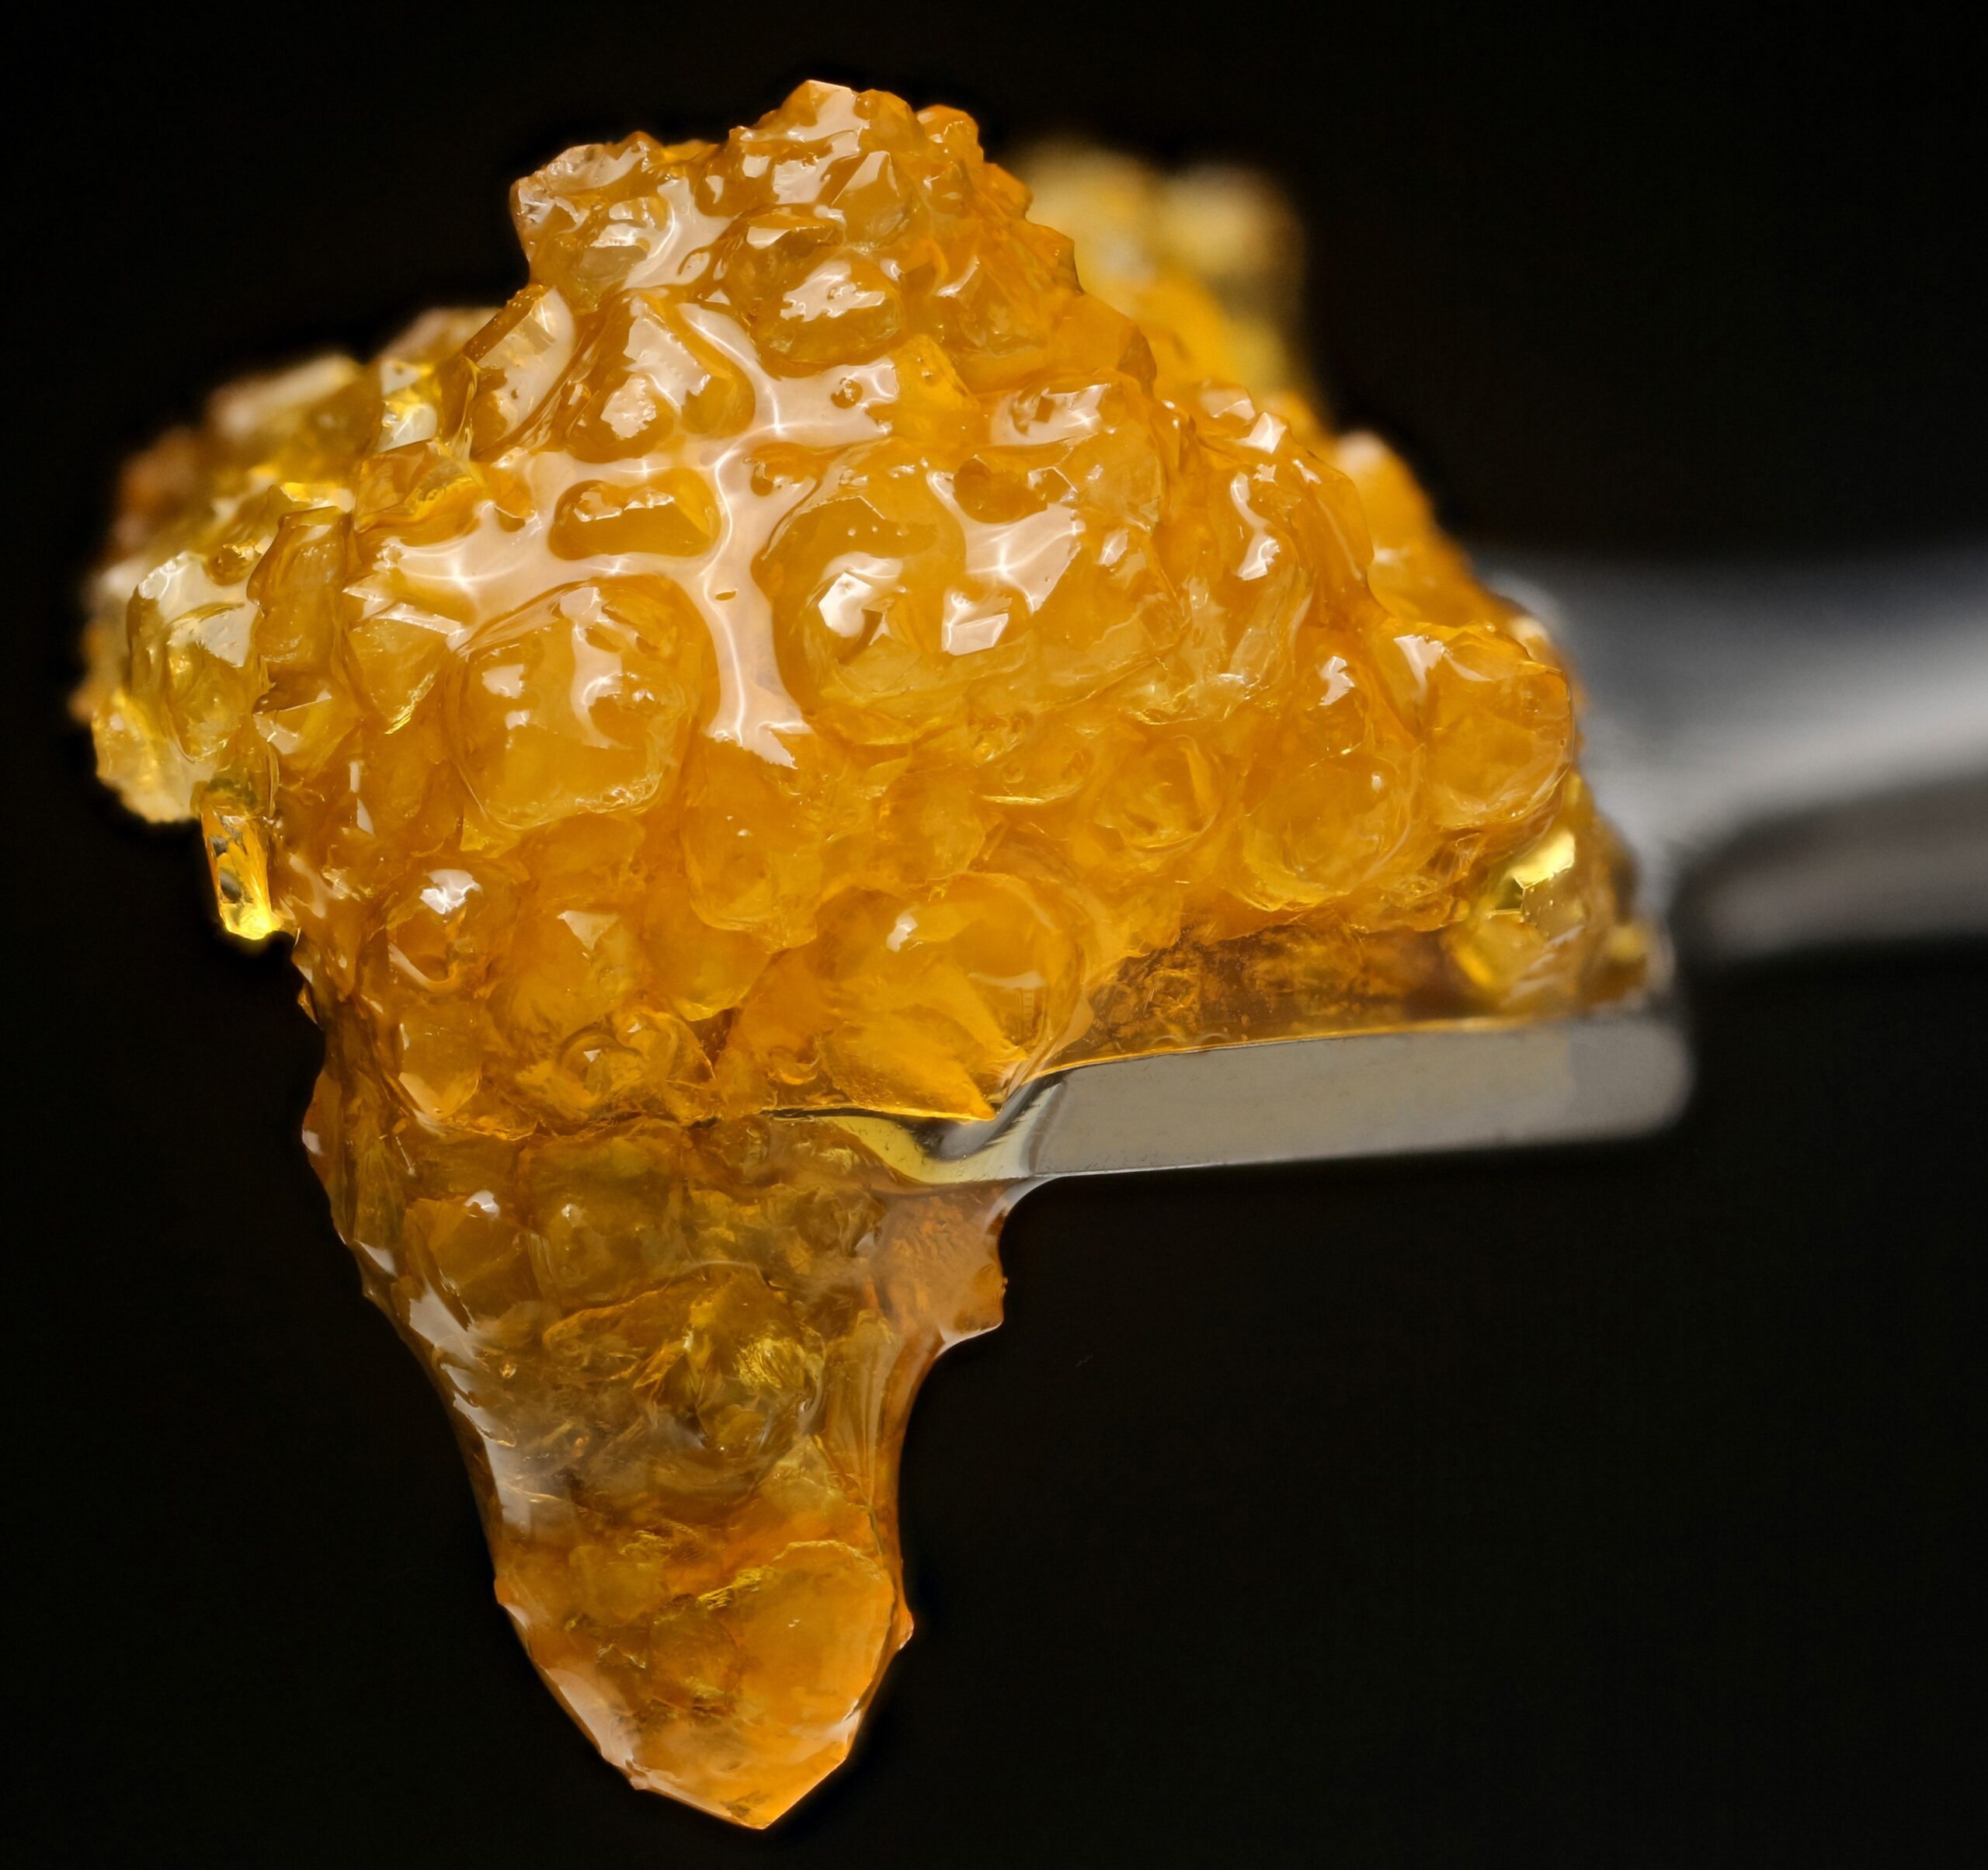 Cannabis concentrate sugar wax dripping off dabbing tool on black background